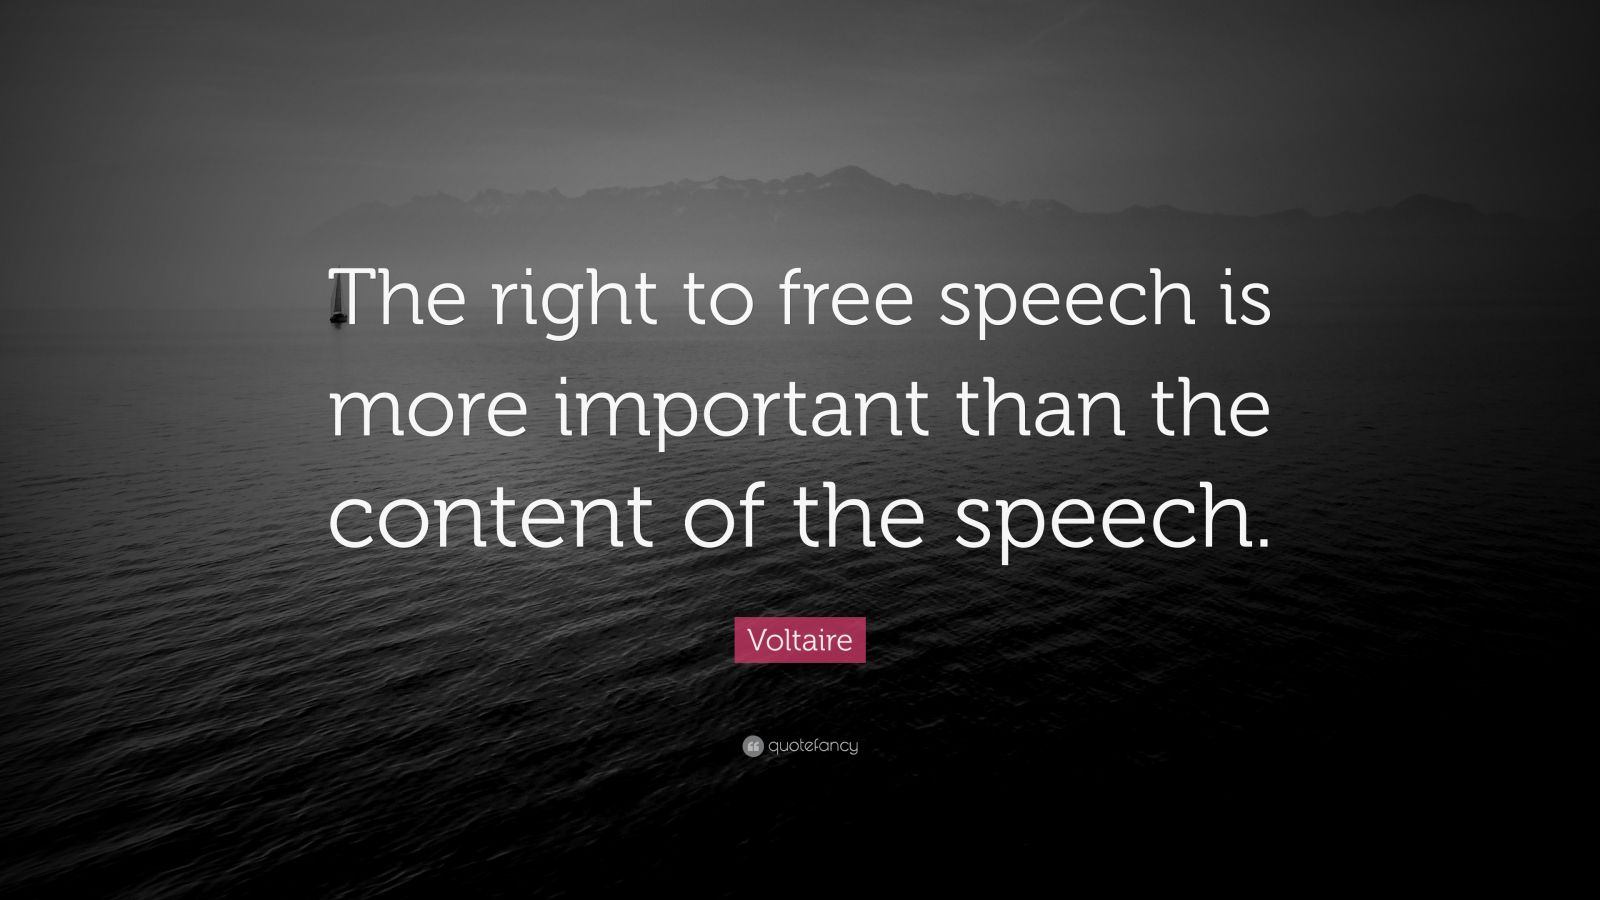 Voltaire Quote “The right to free speech is more